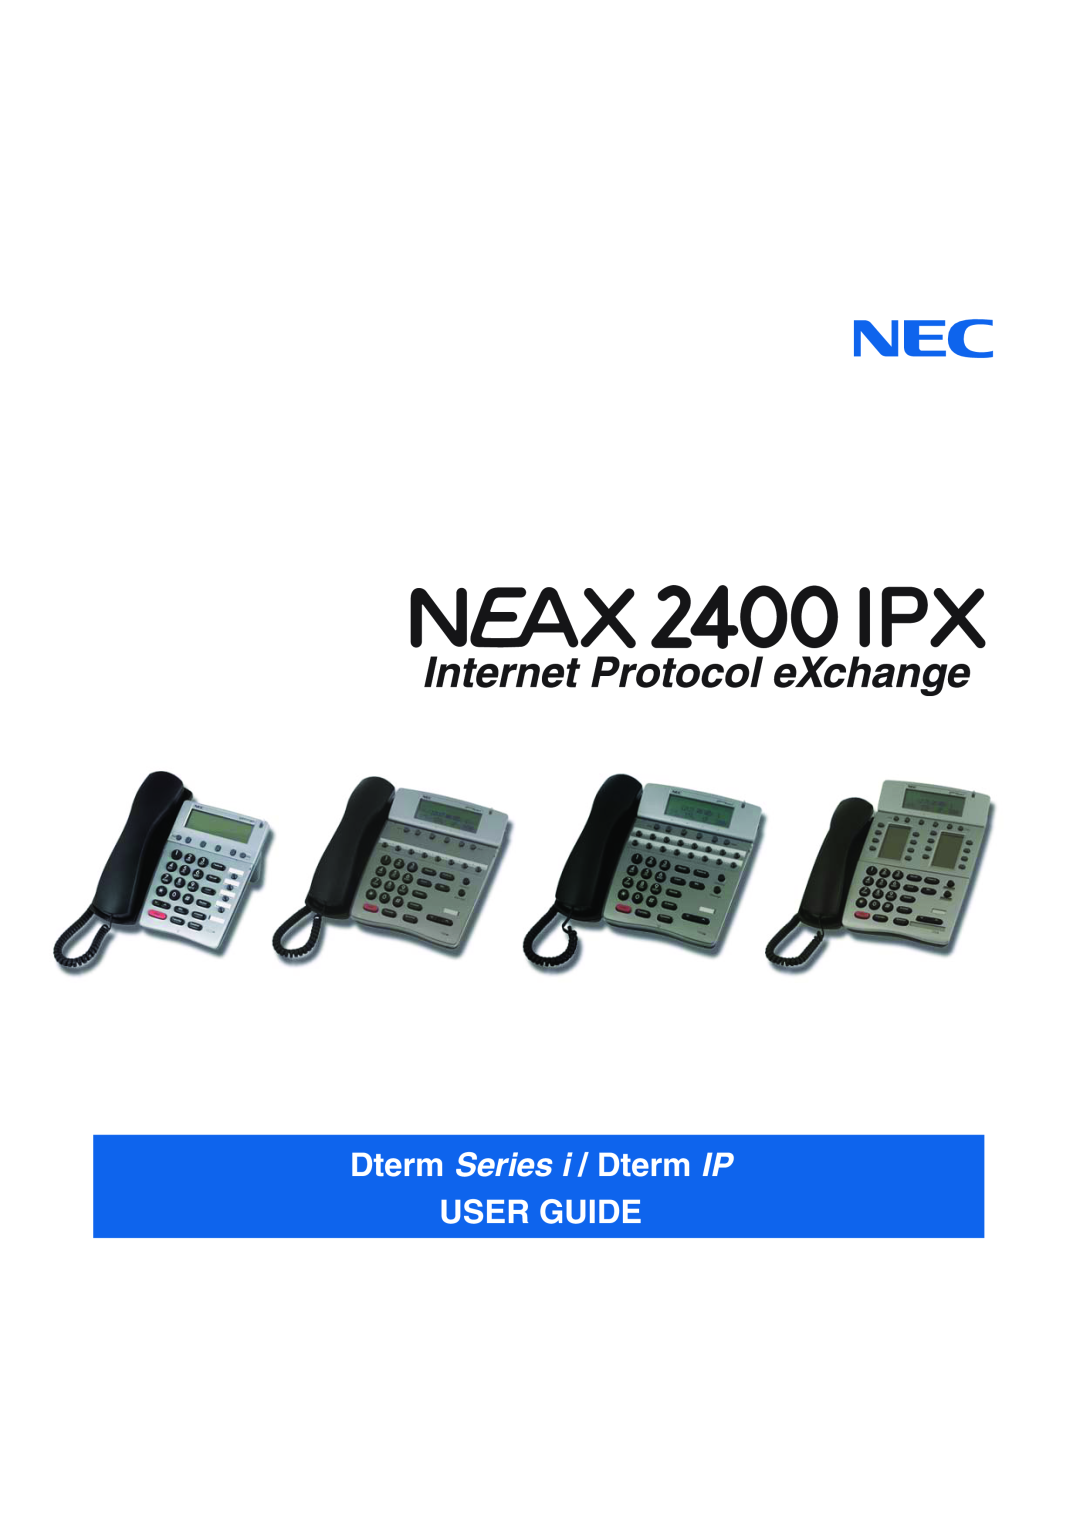 VTech NEAX 2400 IPX manual Dterm Series i / Dterm IP USER GUIDE 